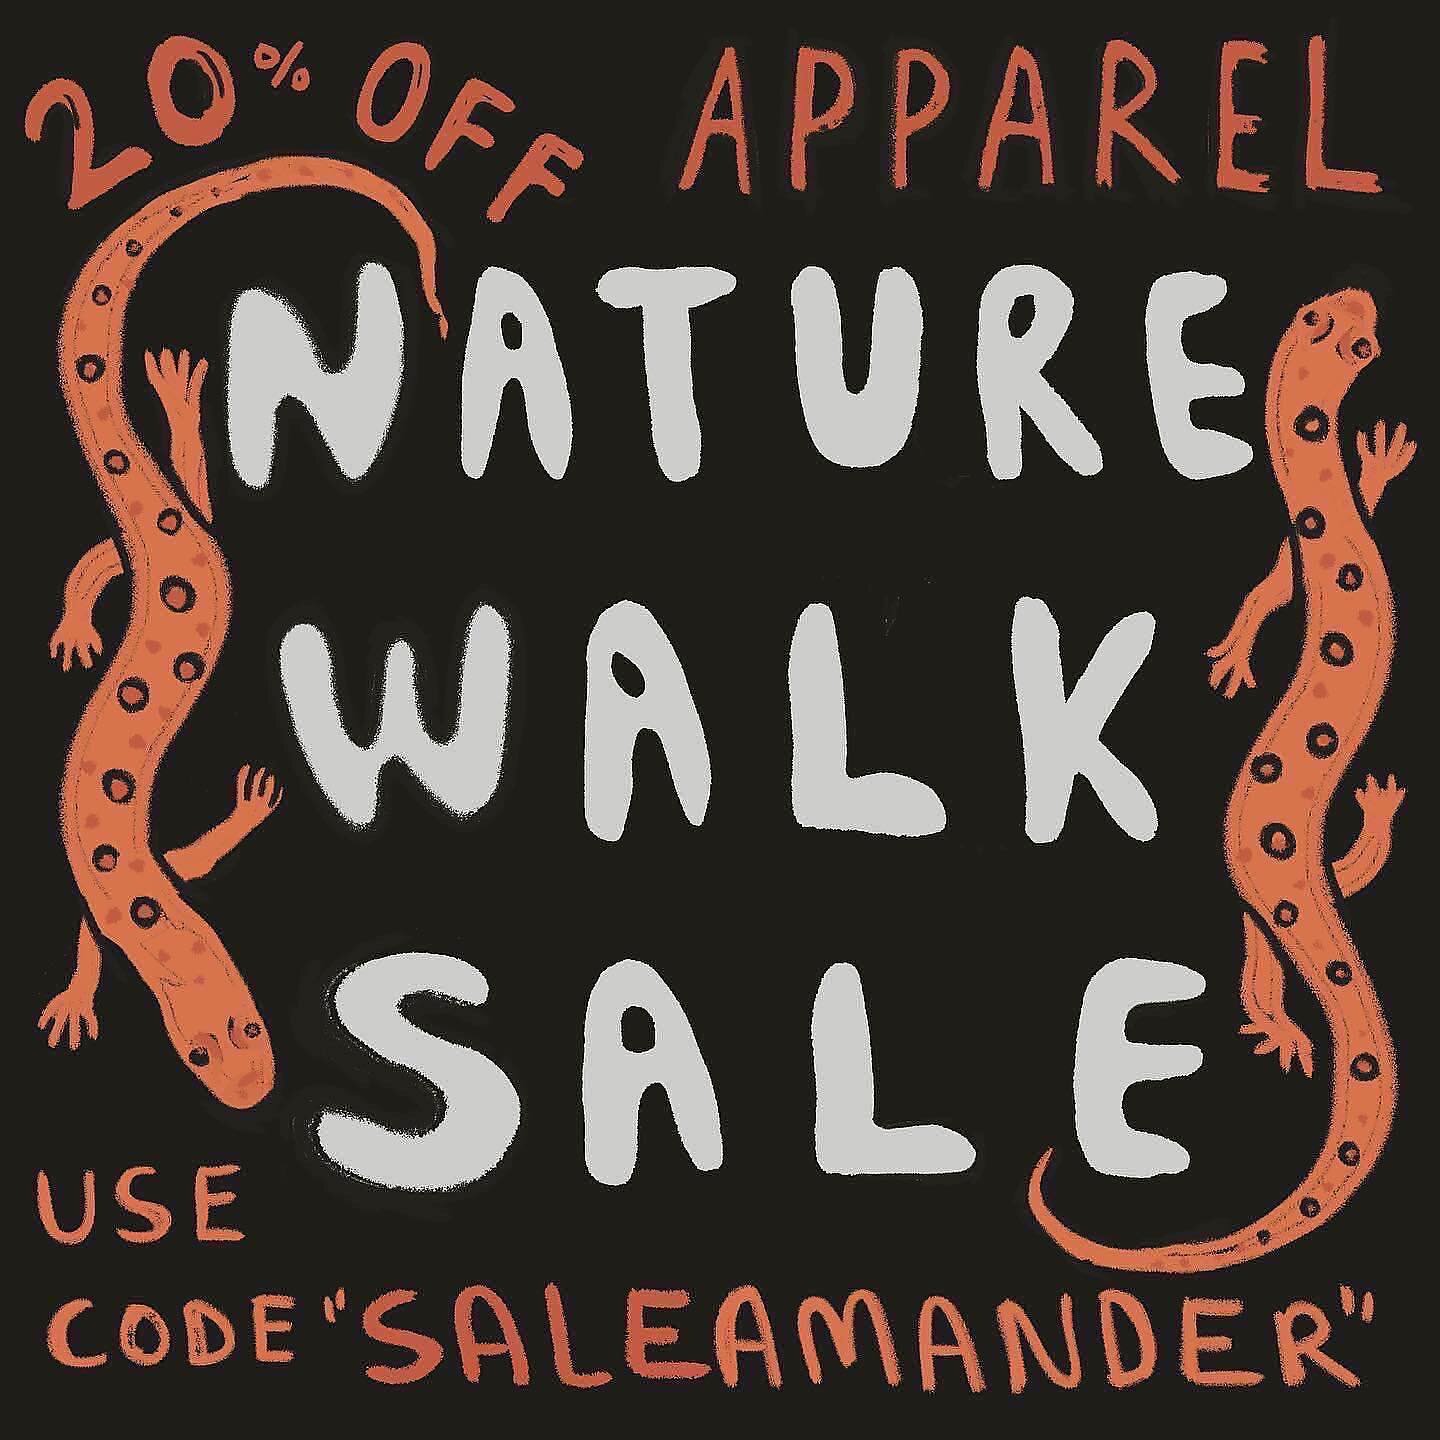 Running a S-A-L-E y'all! &quot;SALEAMANDER&quot;  for 20% off all clothing on the web! 🦎 Show this post in store to redeem at Yankee Springs 🍄